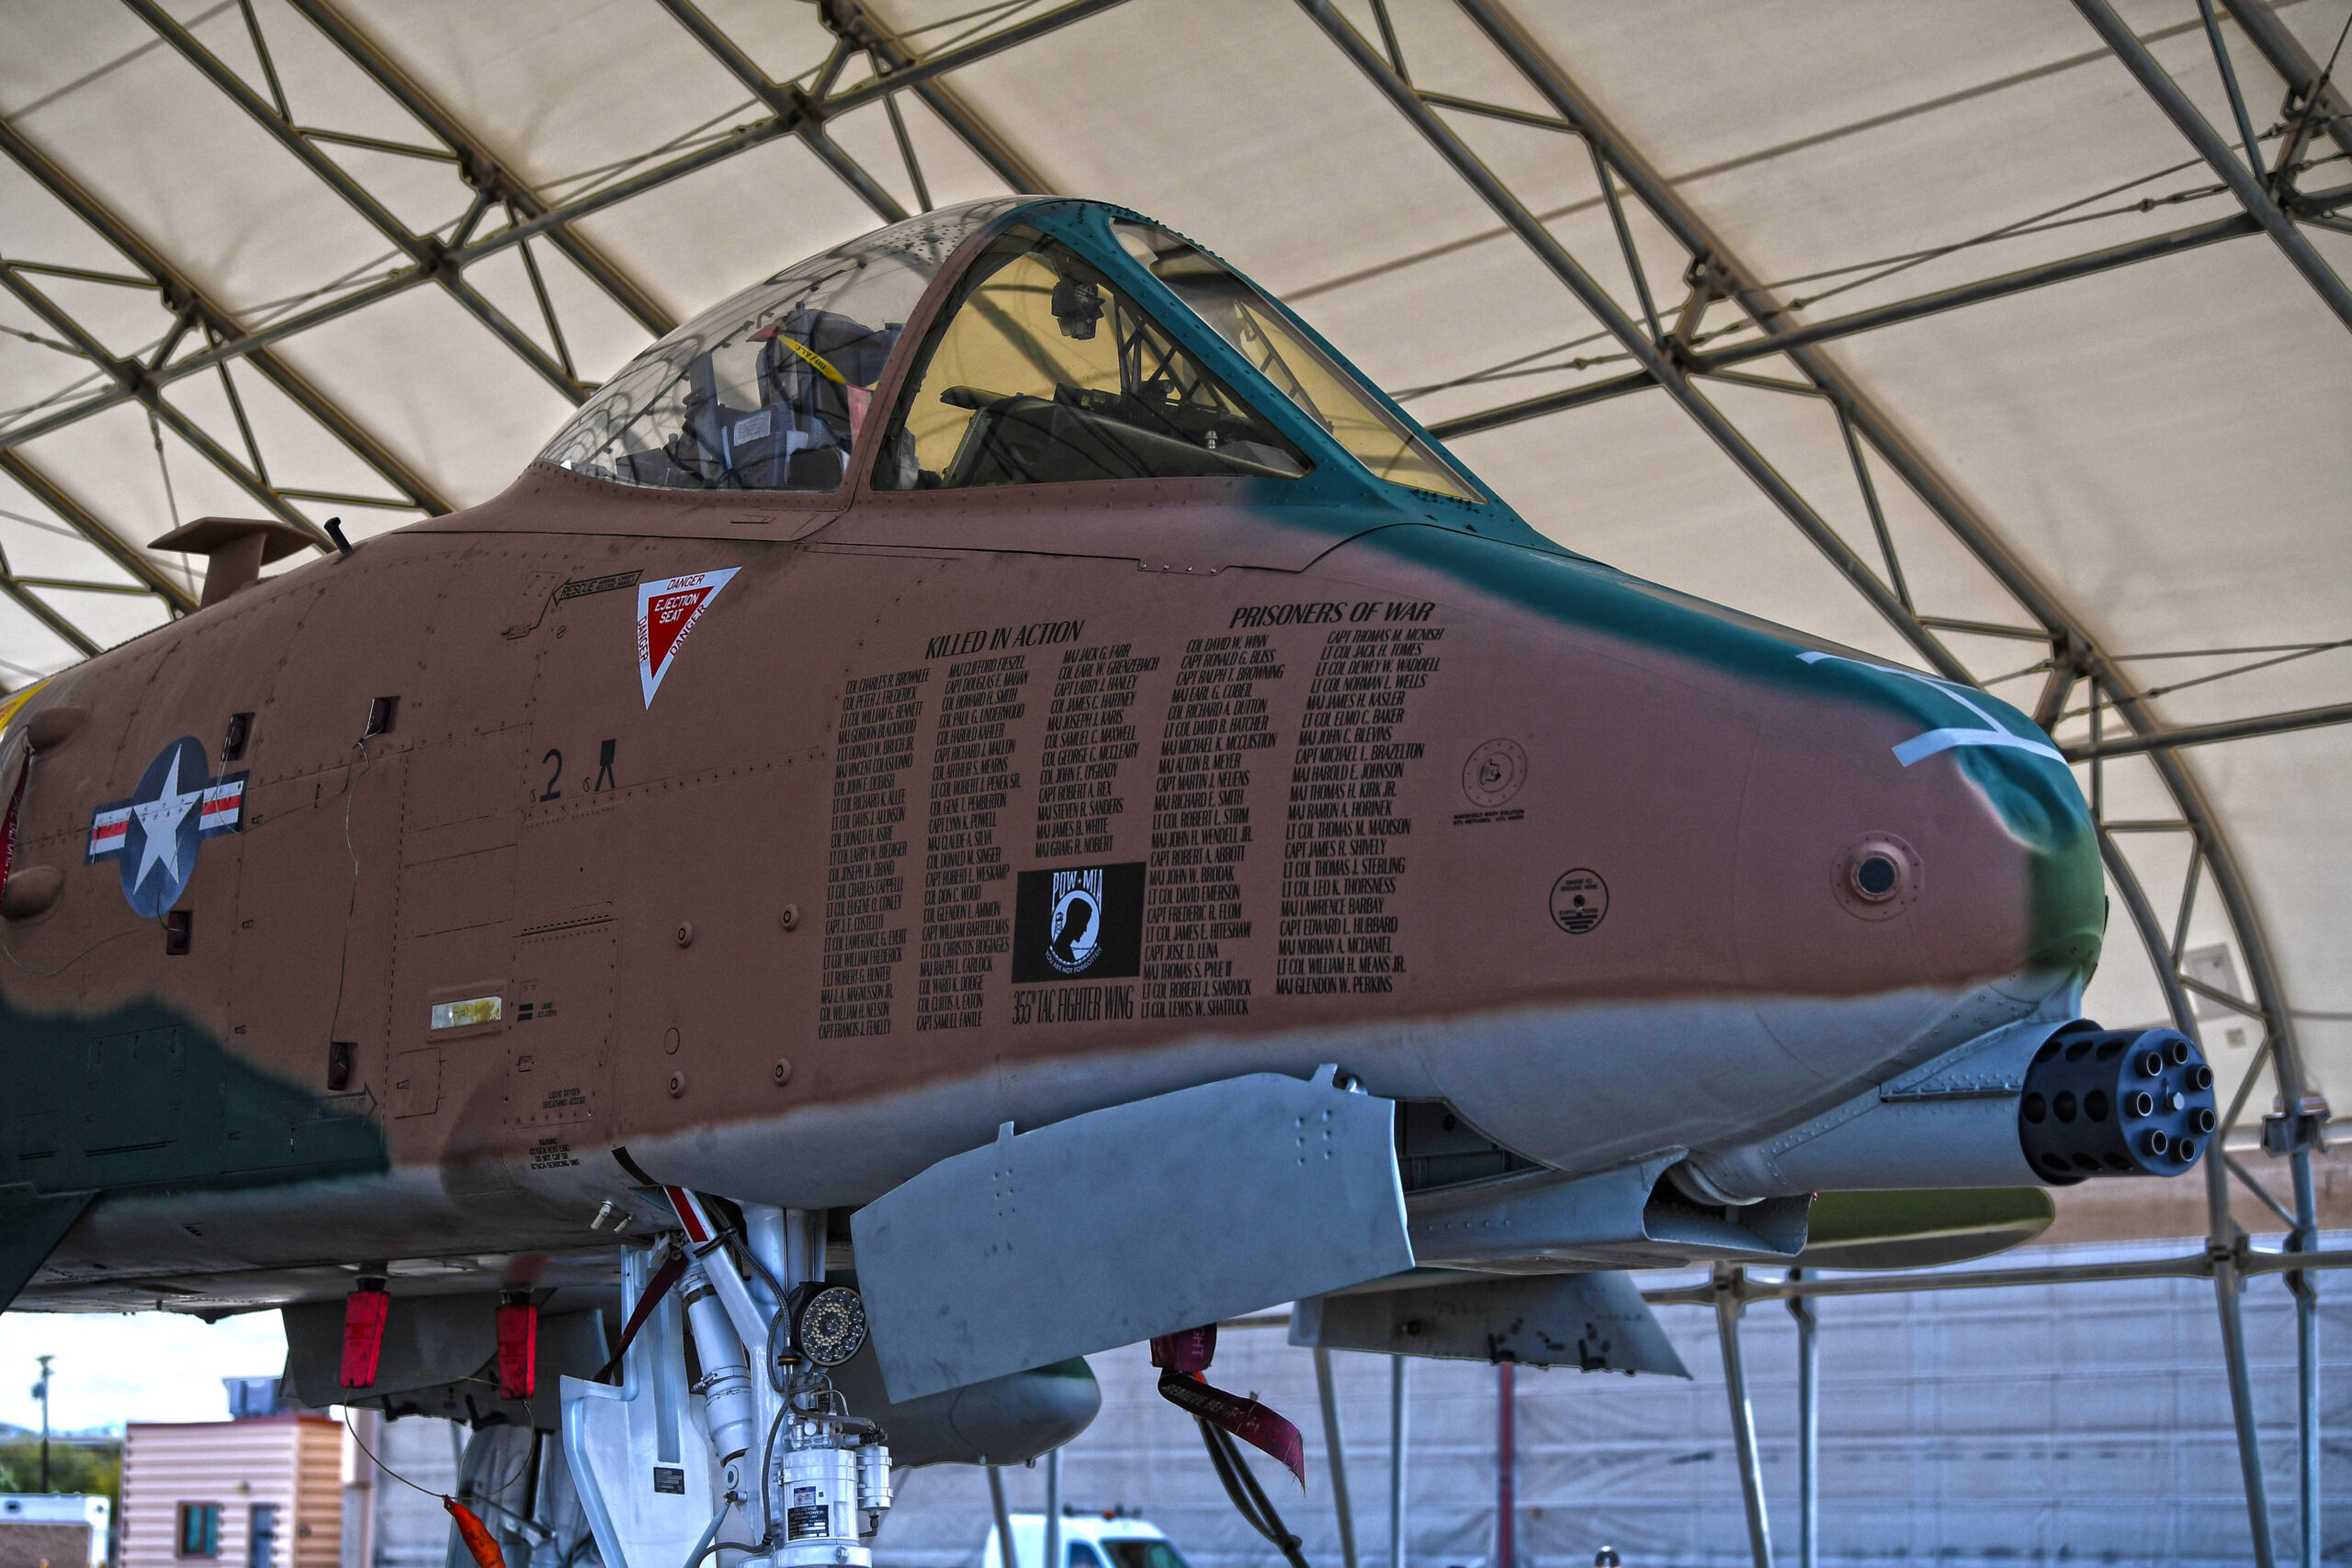 An A-10 Thunderbolt plane with a paint job commemorating American pilots killed or captured in Vietnam